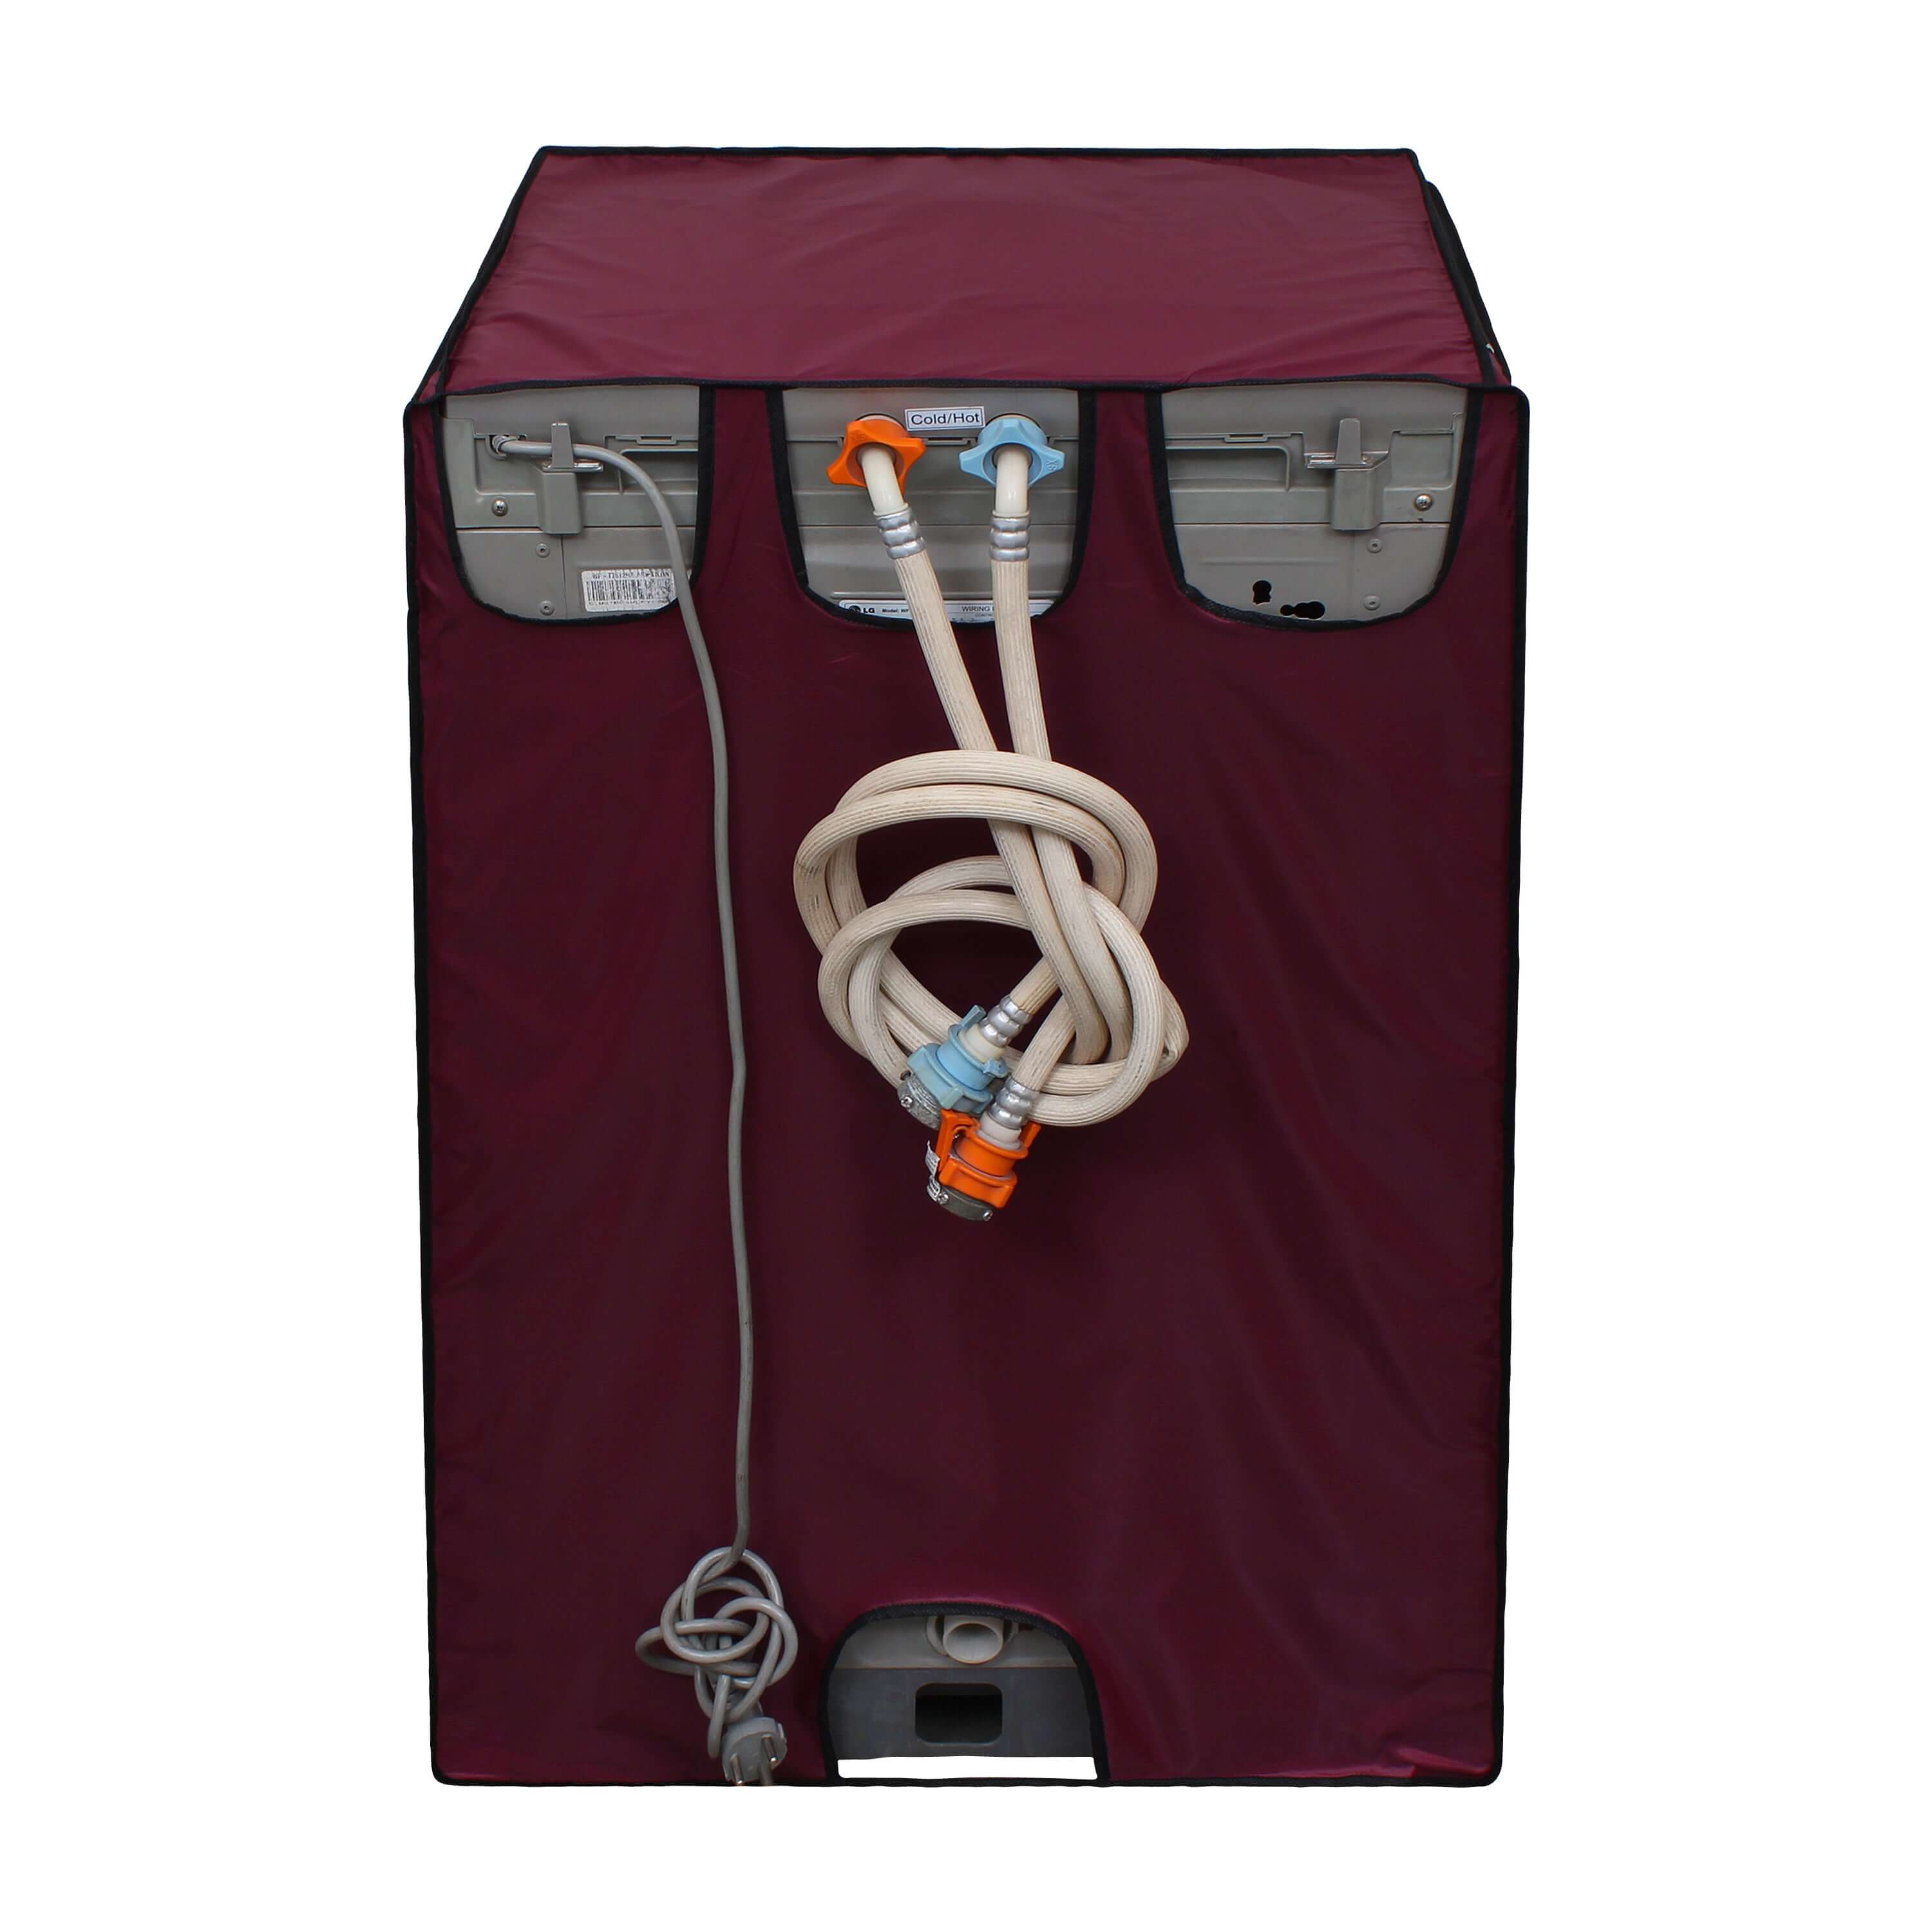 Fully Automatic Top Load Washing Machine Cover, Maroon